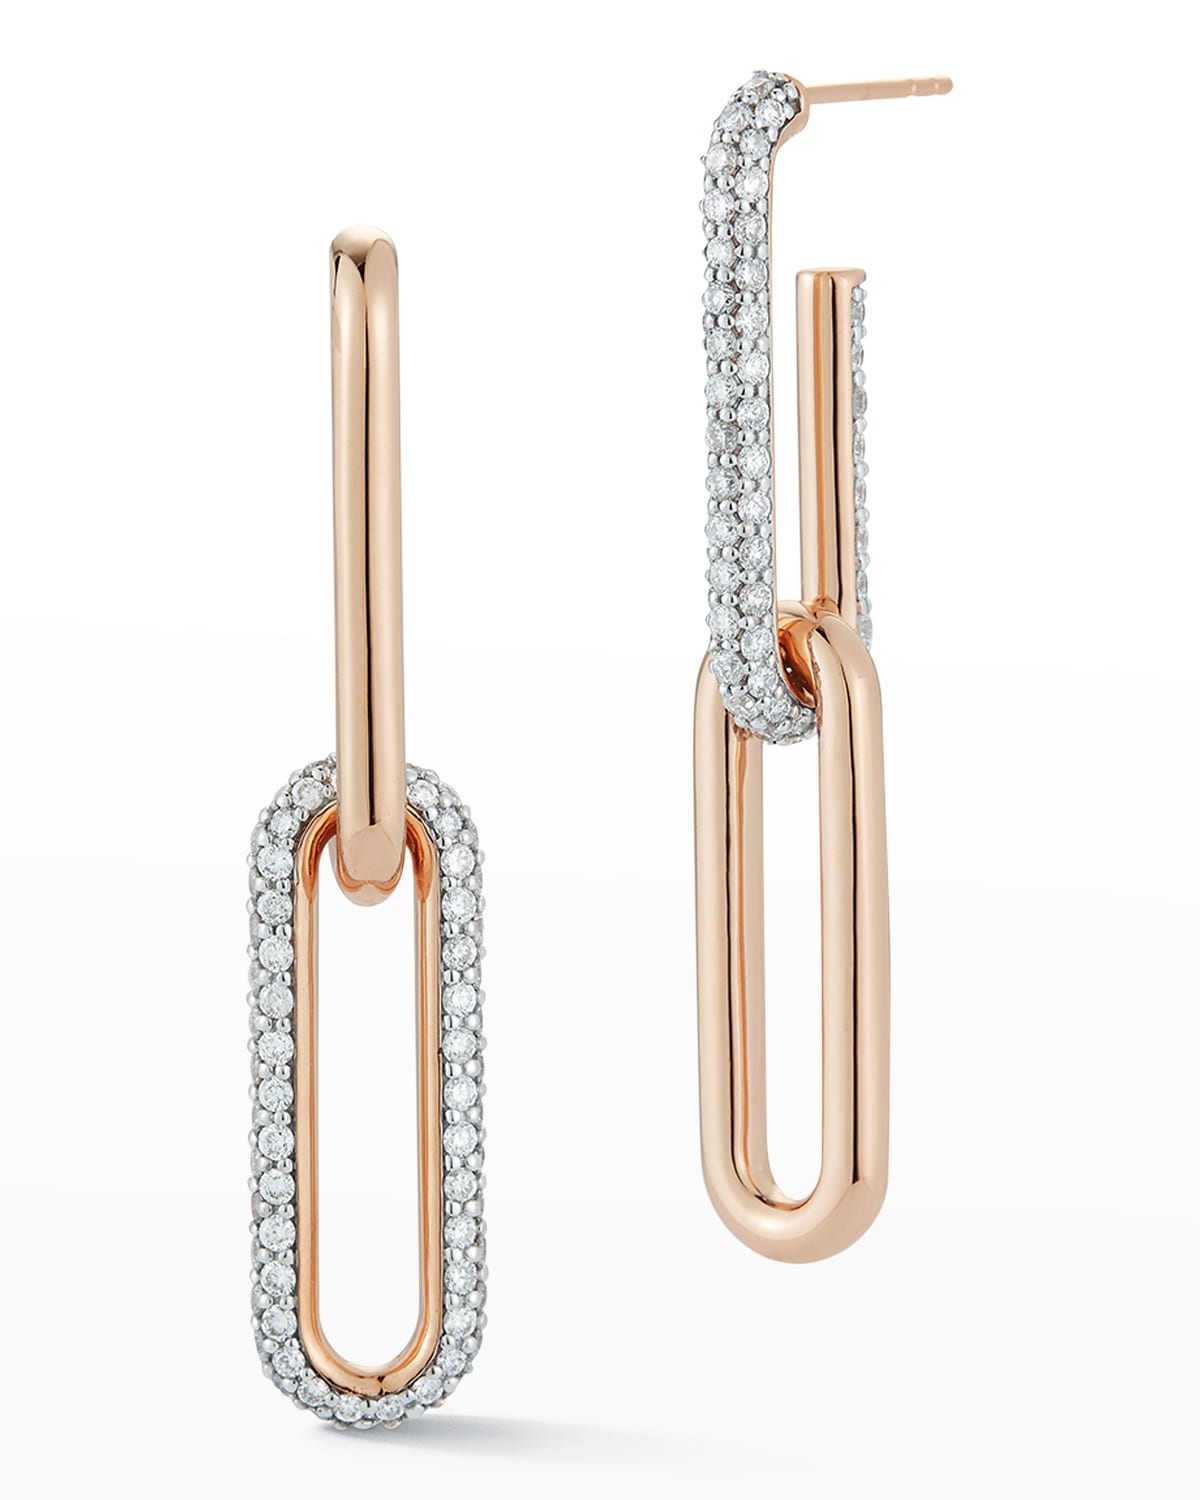 WALTERS FAITH SAXON ROSE GOLD LINK MIX-MATCH EARRINGS WITH WHITE RHODIUM DIAMOND LINK